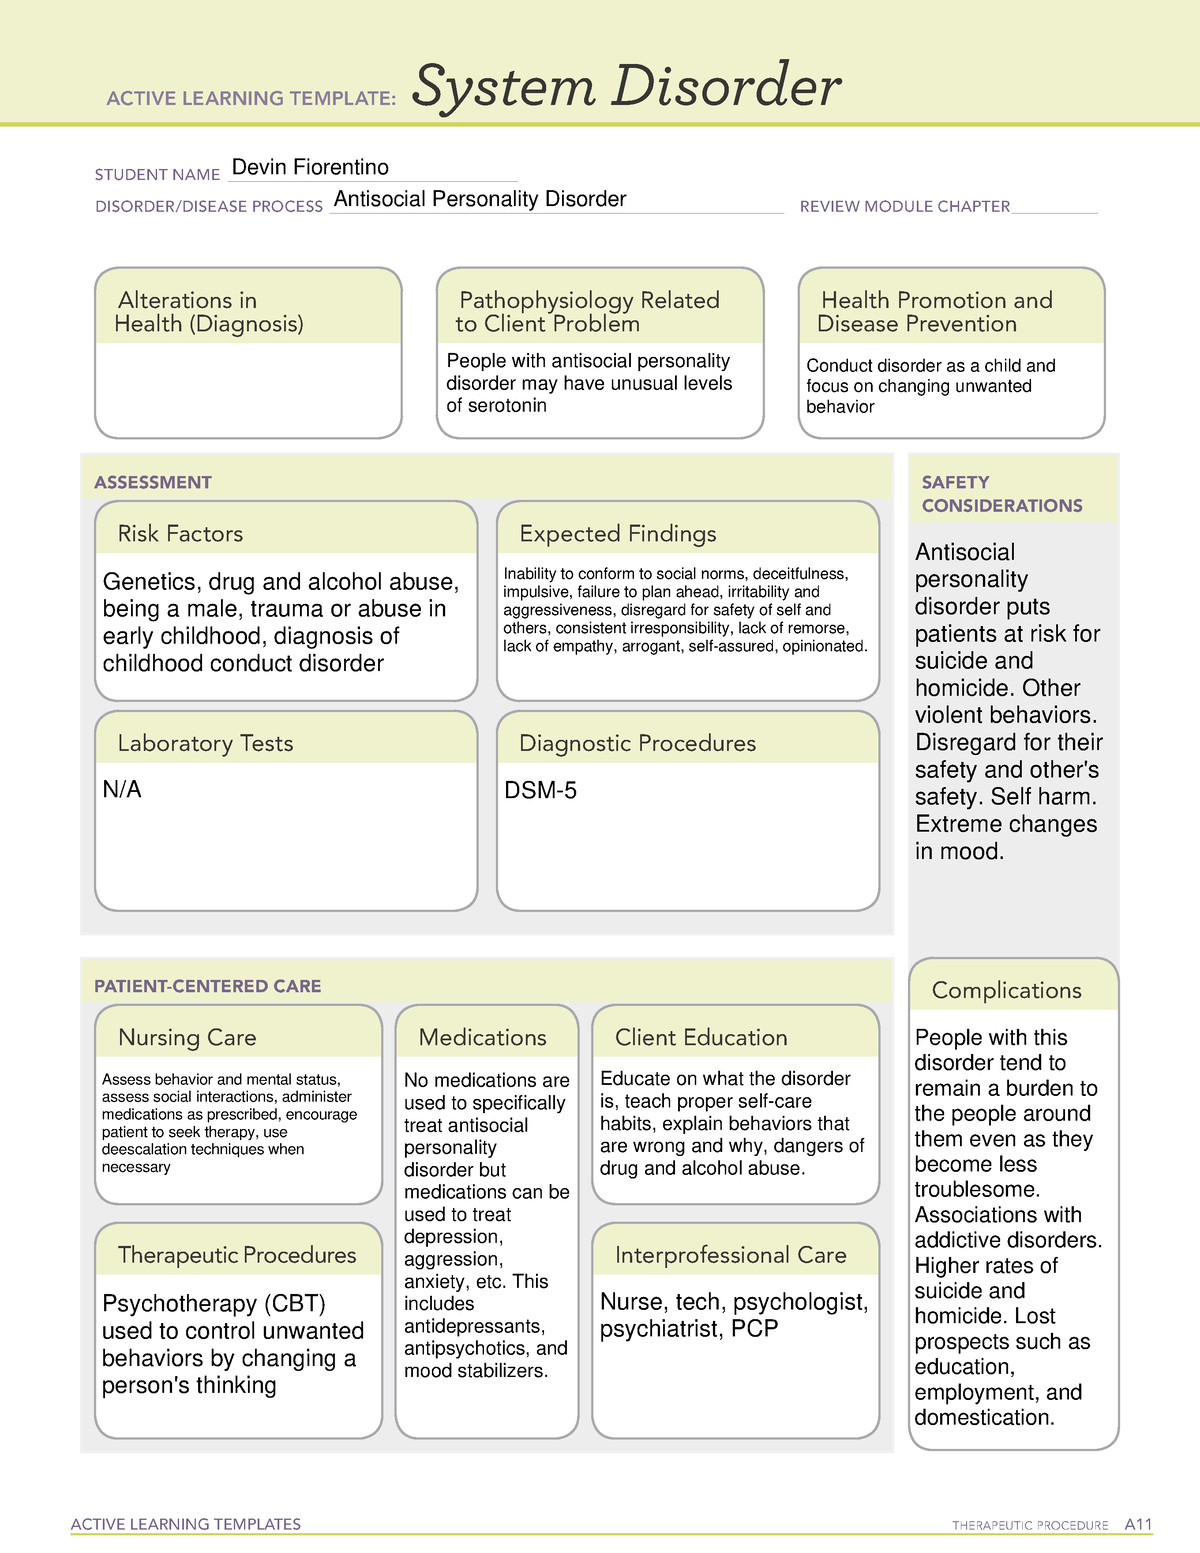 Antisocial Personality Disorder ATI Template ACTIVE LEARNING